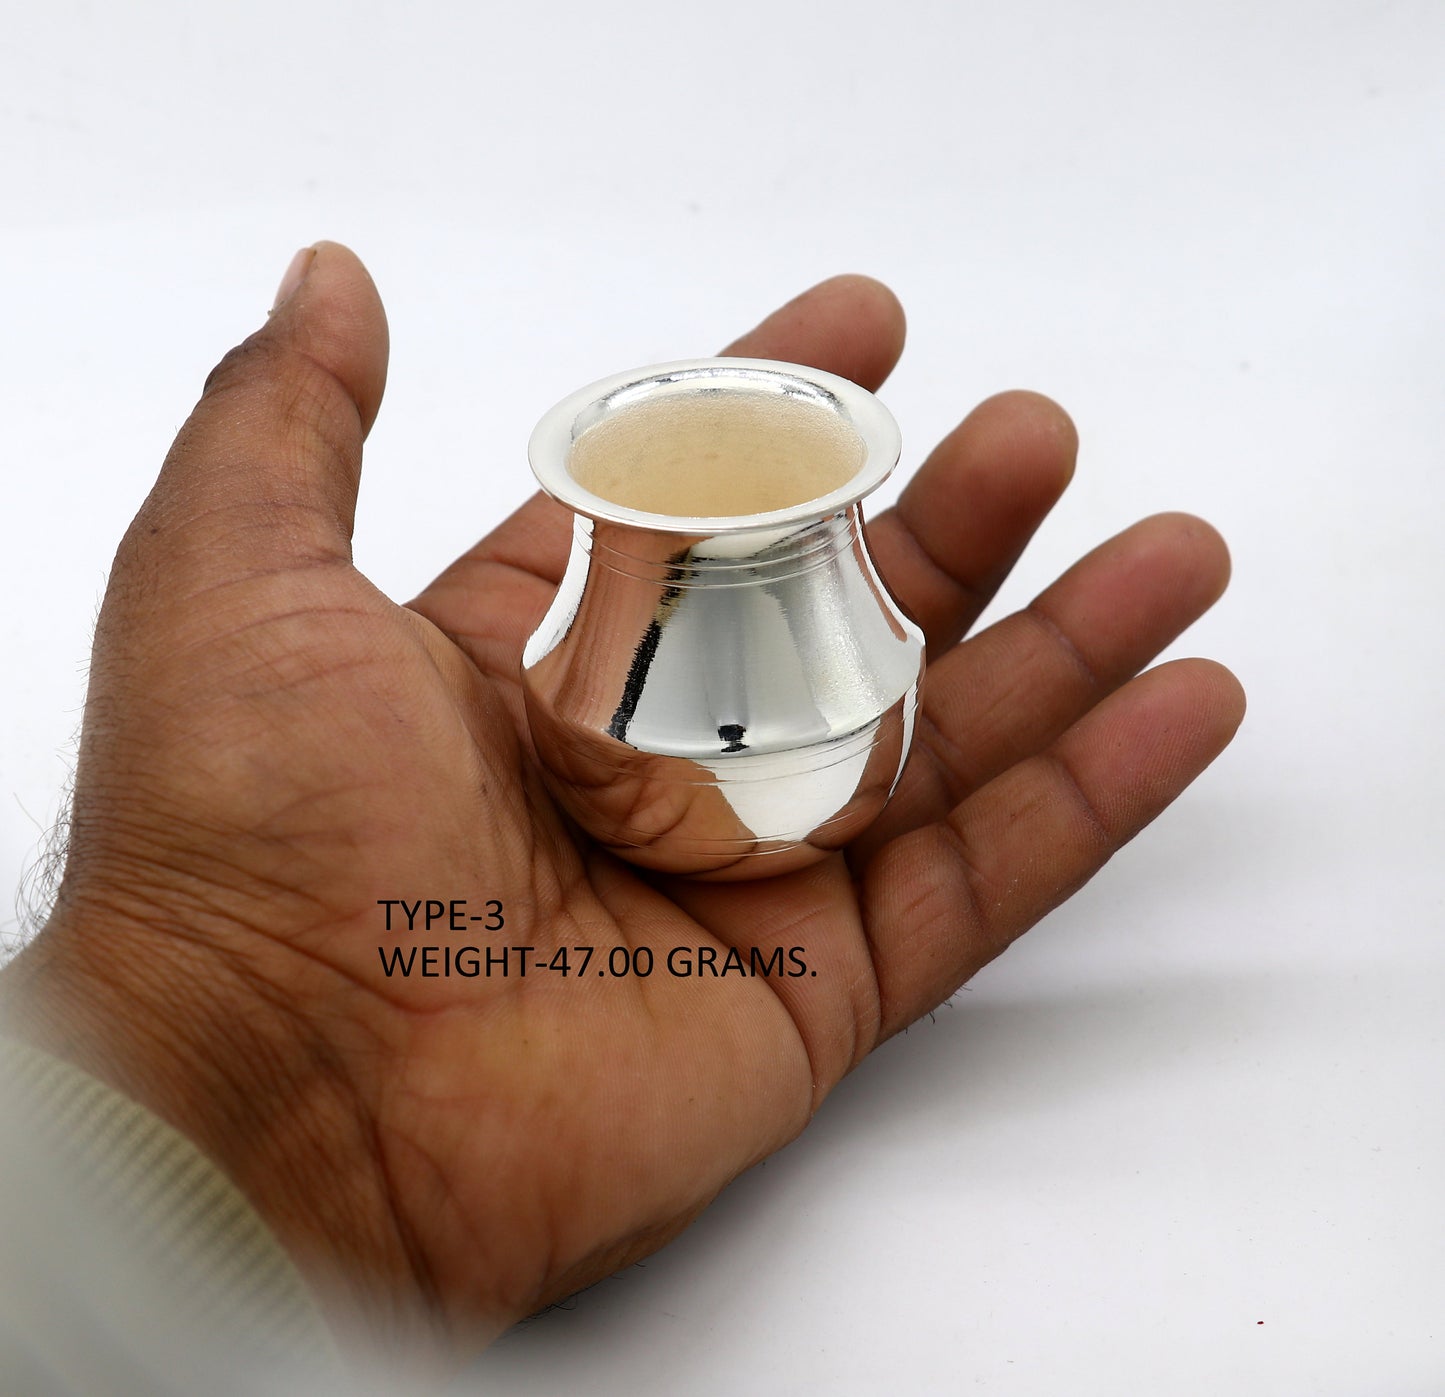 Pure 925 sterling silver handmade plain small Kalash or pot, unique special silver puja article, water or milk kalash pot india su1236 - TRIBAL ORNAMENTS